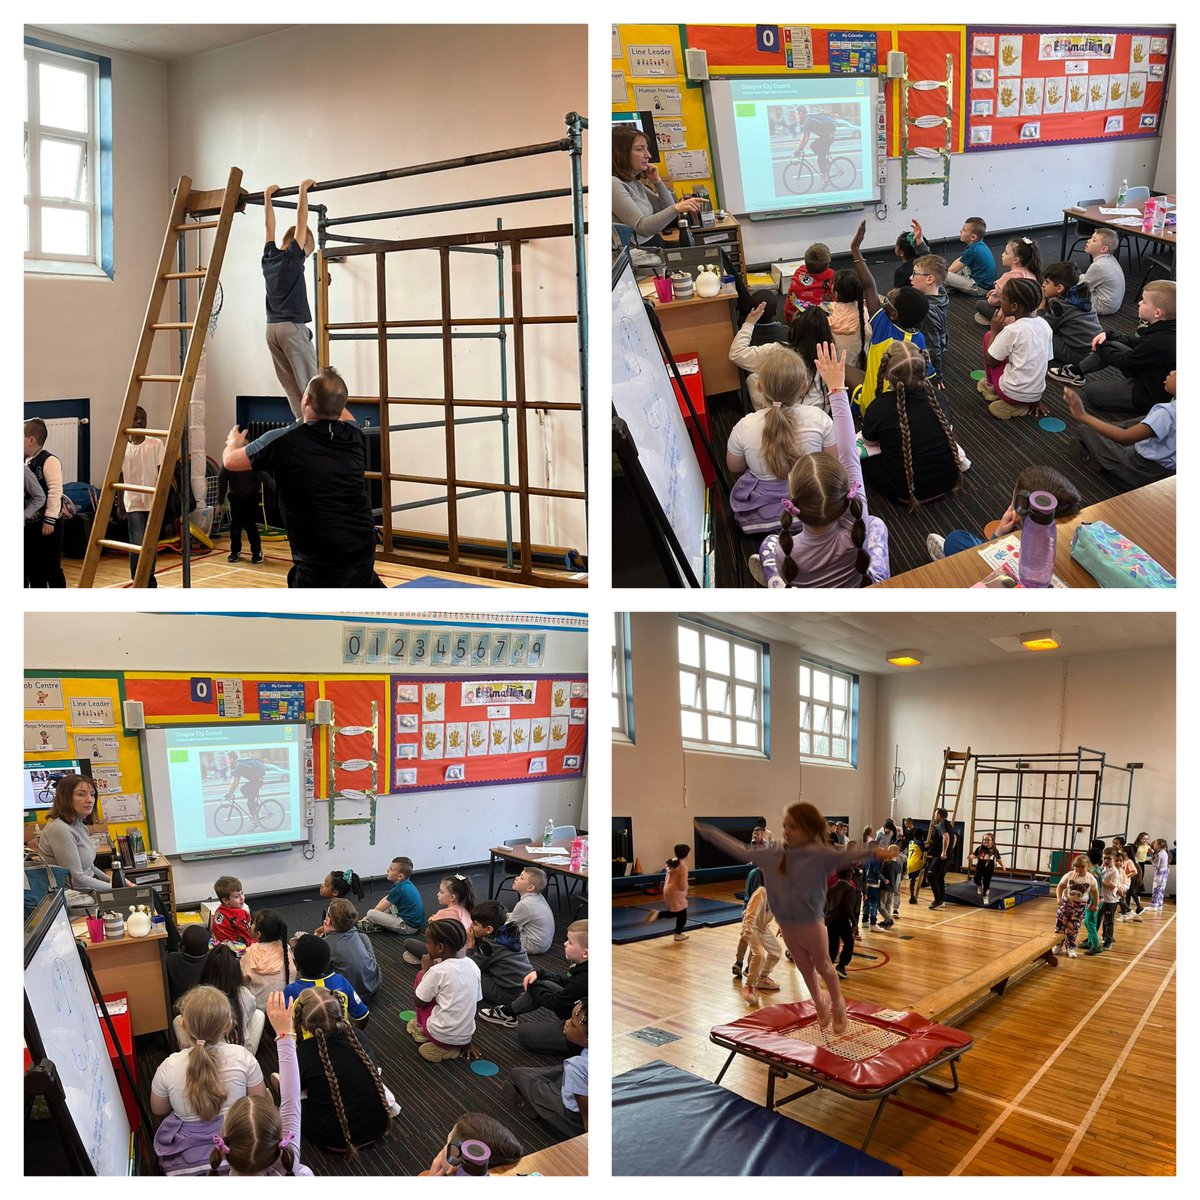 Day 2 of Health Week saw more @DT_Glasgow workshops, @mrcassidy12 led gymnastics sessions with all classes, staff from Asda and Panku taught P4 and P5 how to make sushi and classes received road safety workshops #GCCRoadSafety